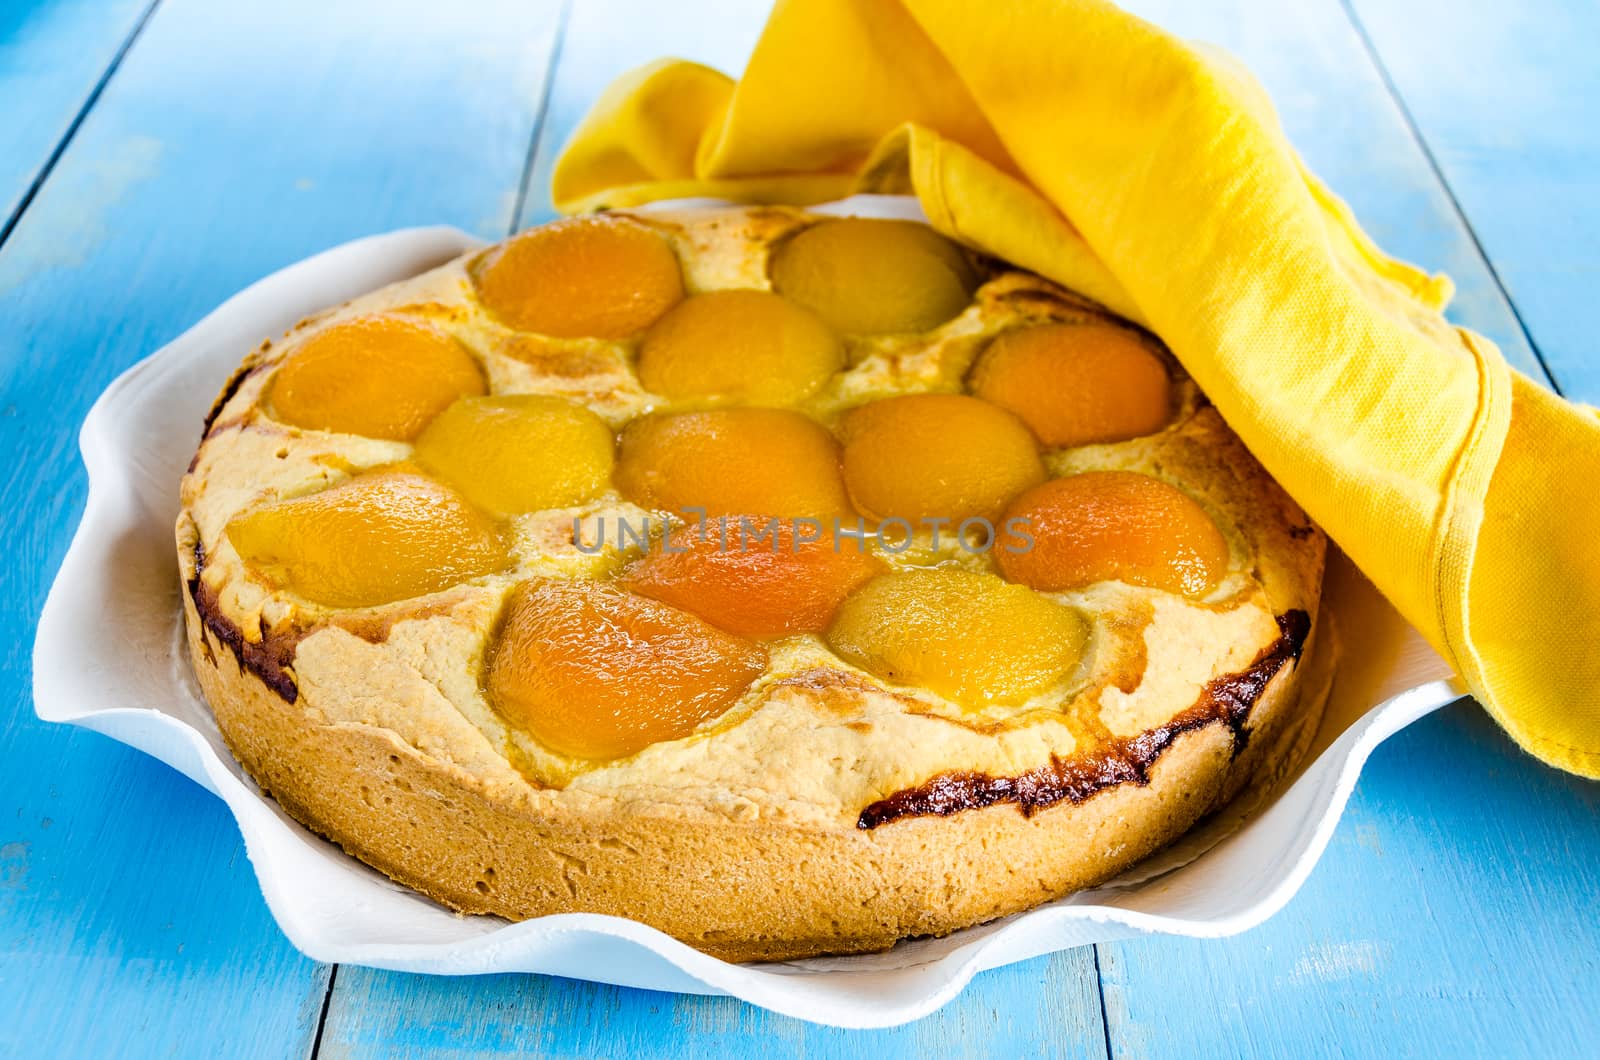 Homemade fresh apricot cake on blue wood table with yellow napkin